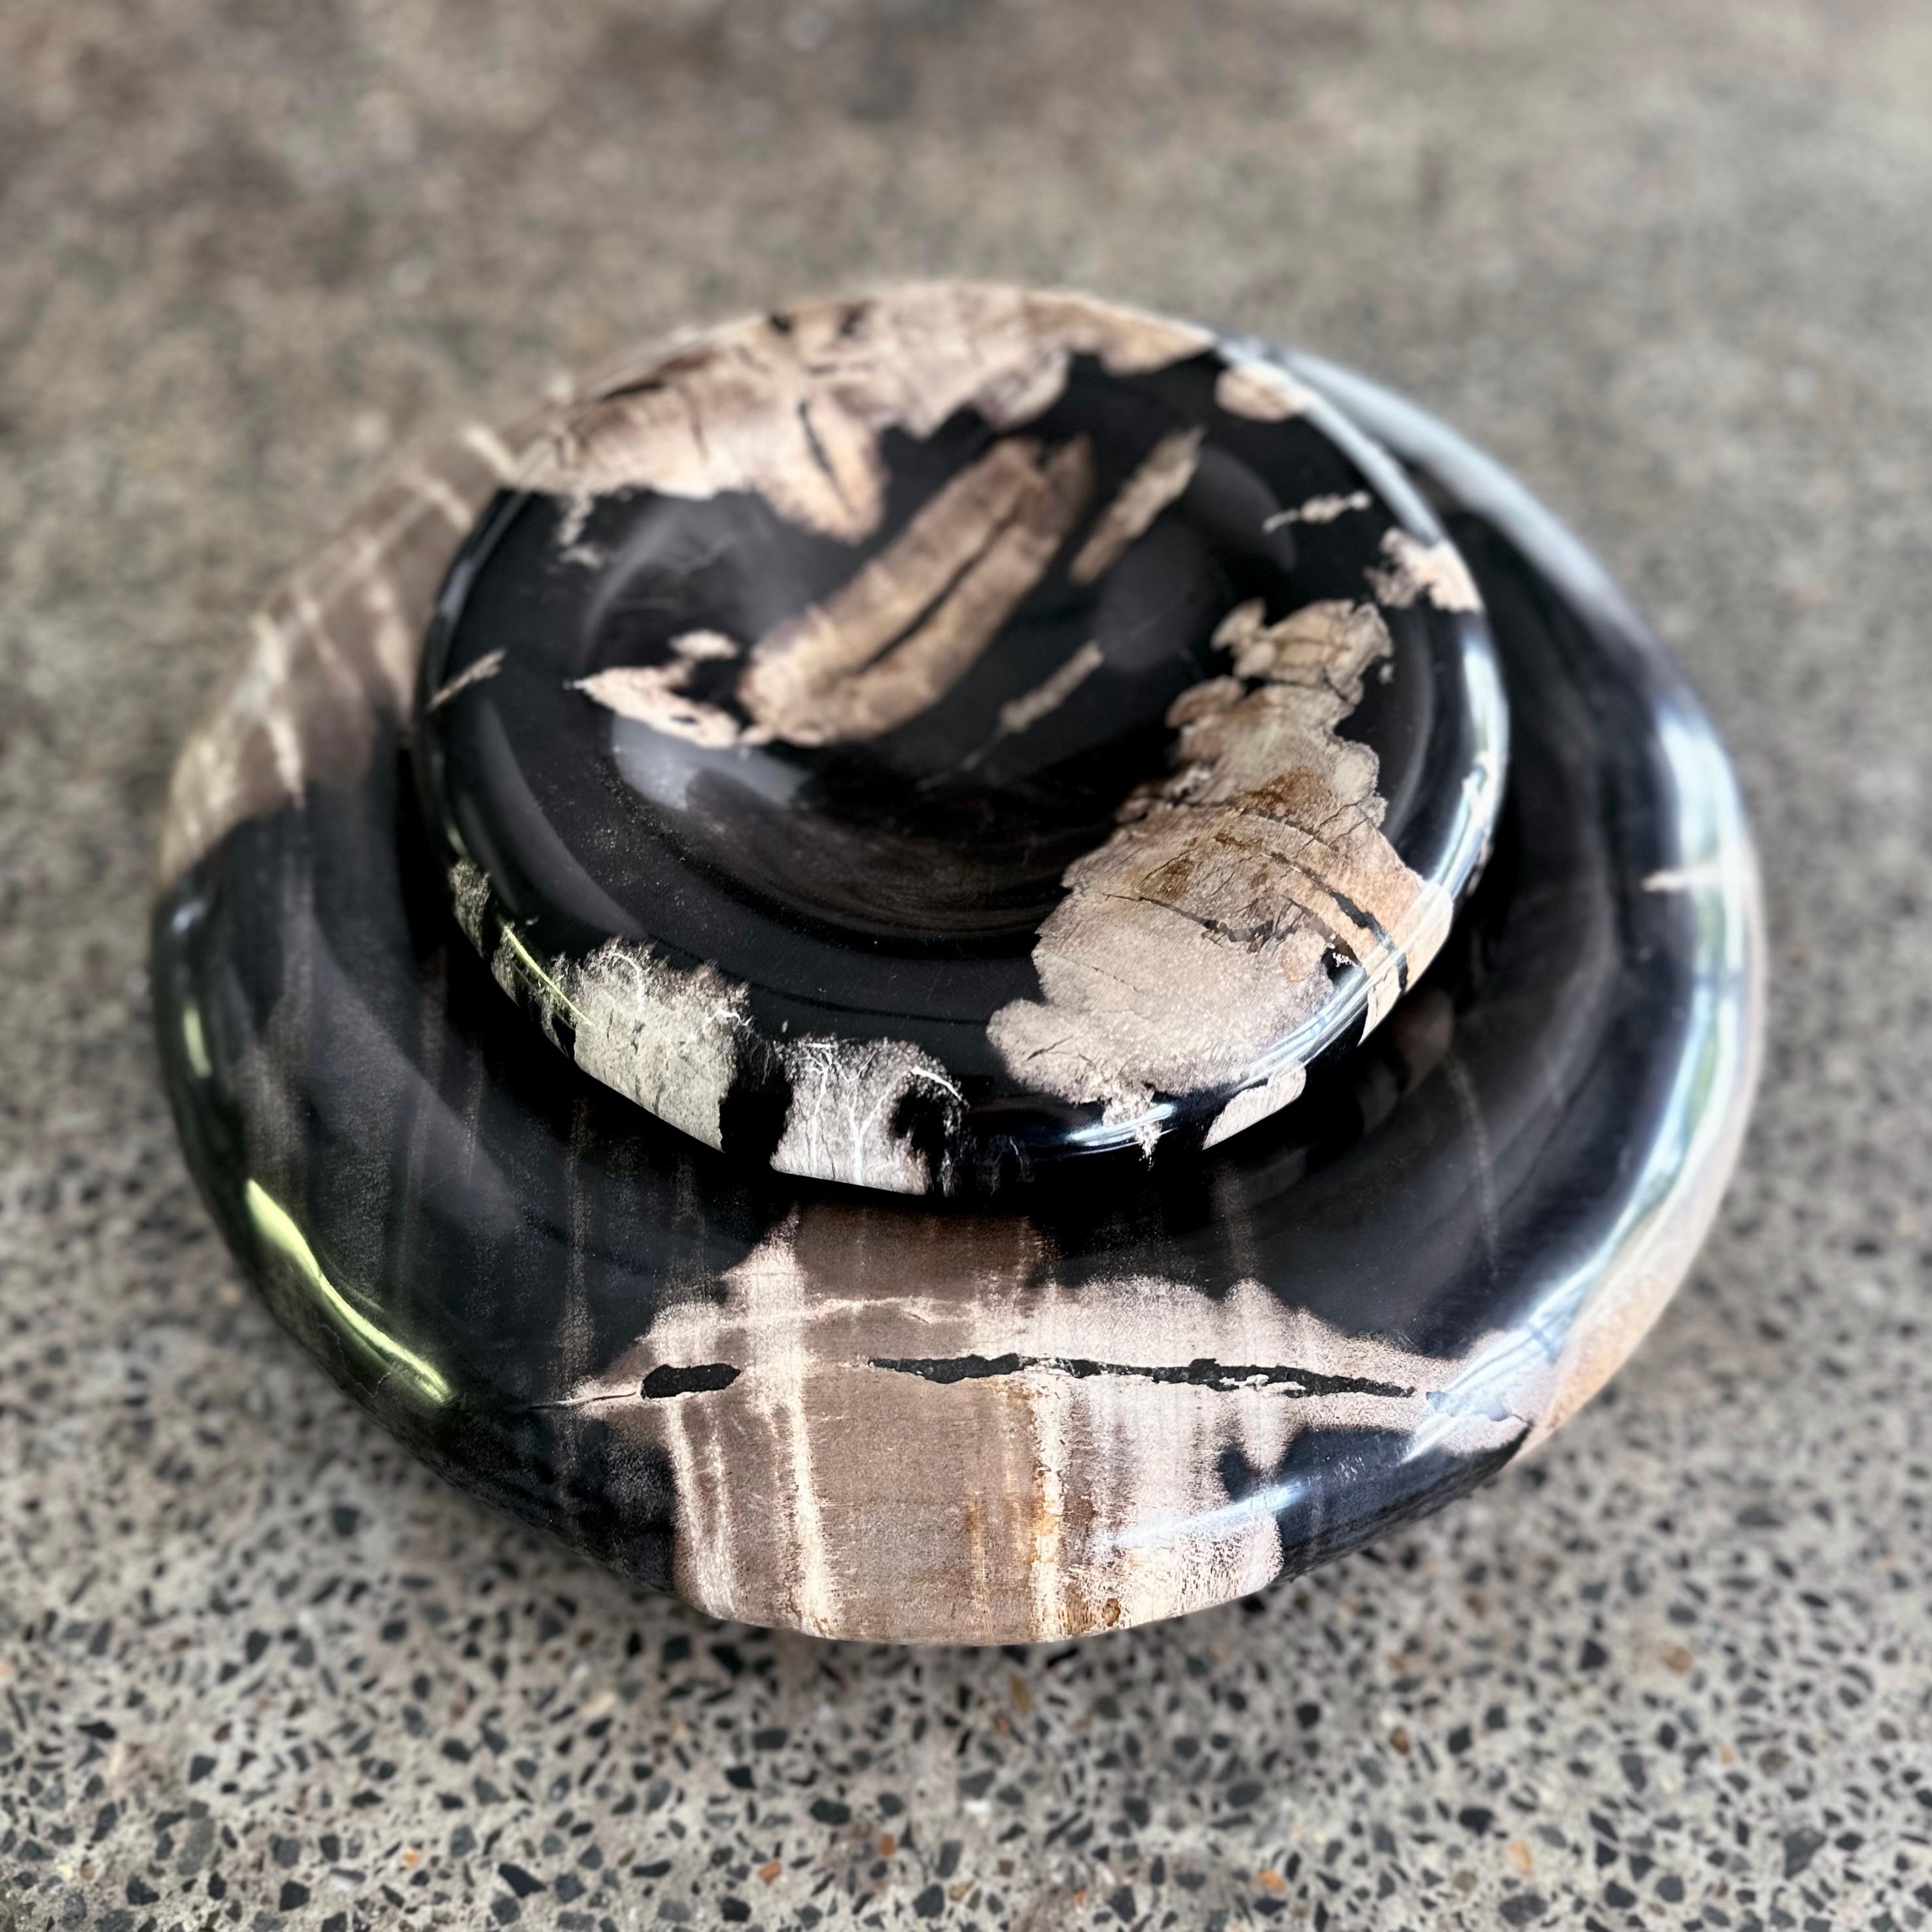 'Round & Round' are modern organic petrified wood sculptural bowls. The striking nature of the mineral motifs featured in this material, compliments the minimalist form. 

This is a meticulously hand sculptured product. Each object will have its own